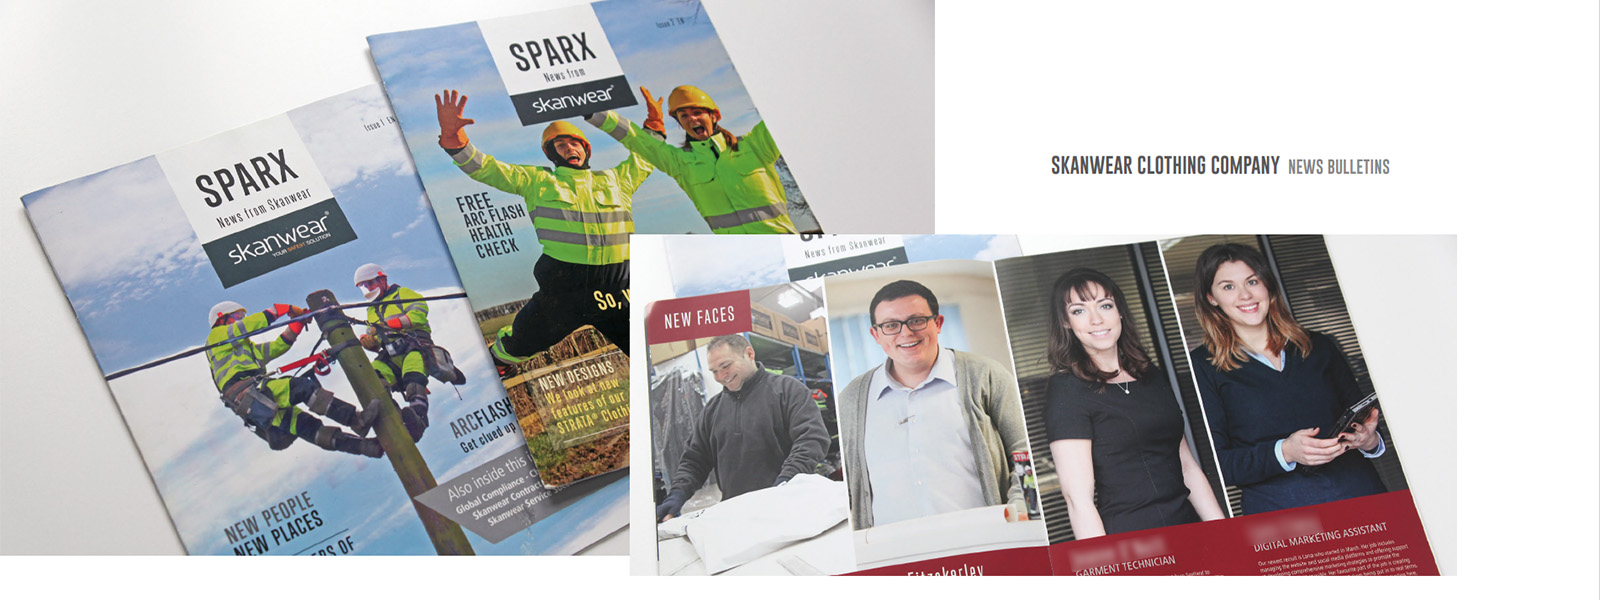 This is an image of newsletters that were produced for skanwear clothing company in doncaster